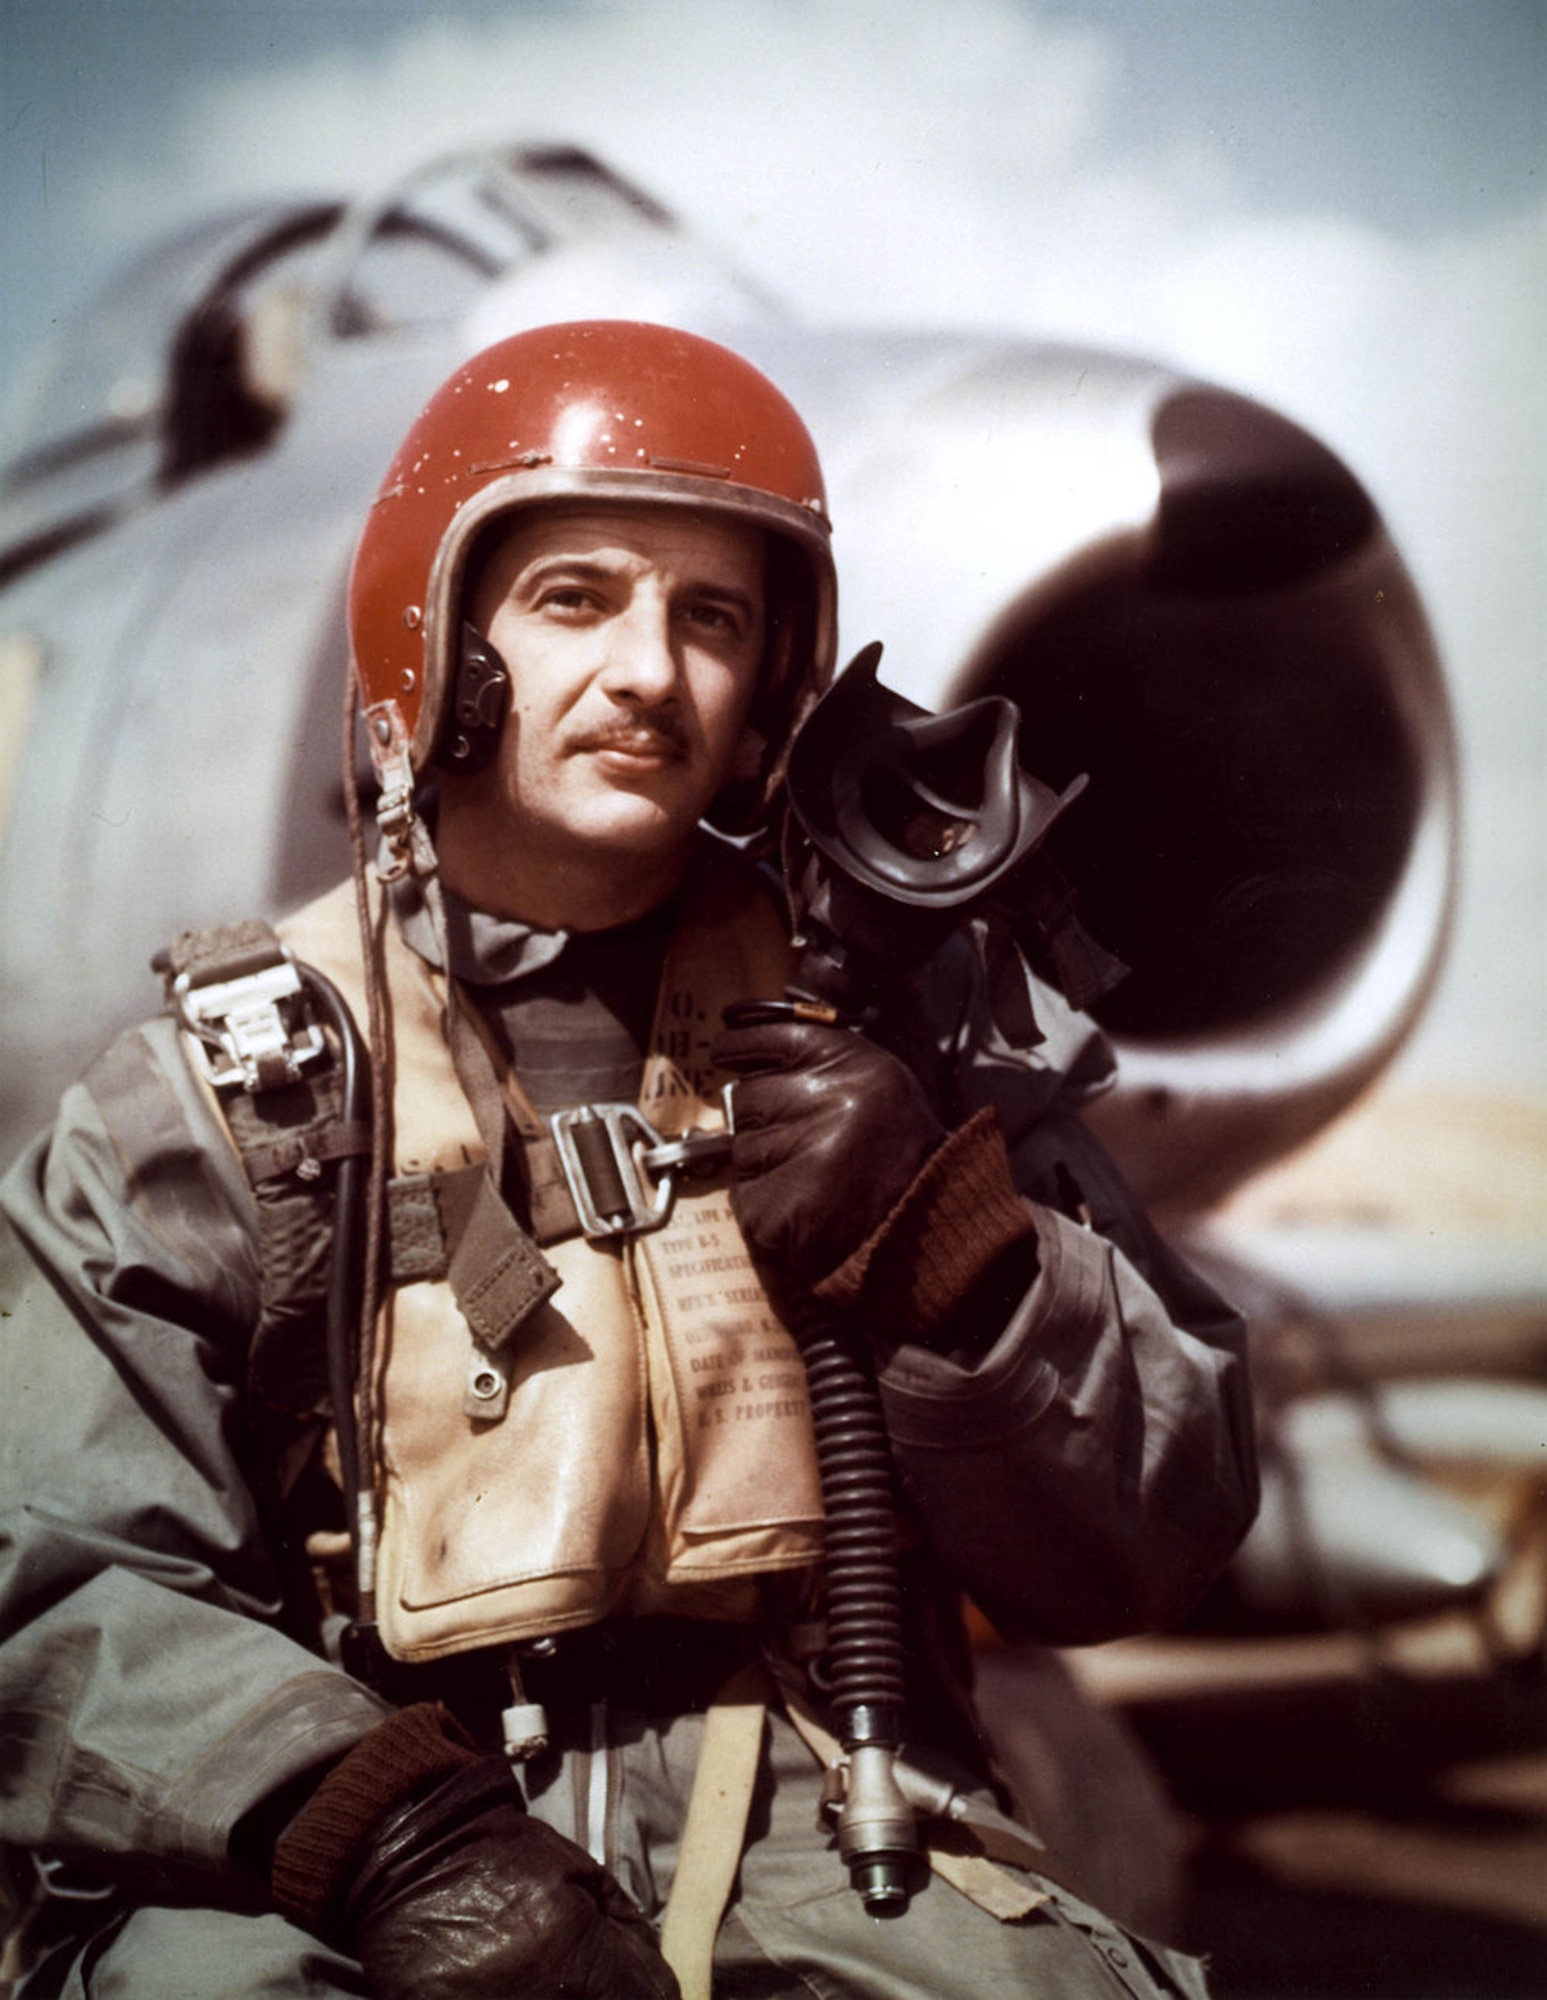 Capt. Manuel Fernandez, 334th Fighter Interceptor Squadron F-86 Sabre pilot, Kimpo Air Base, Republic of Korea, poses with his aircraft during the Korean War. Fernandez was the third highest ranking American flying ace of the Korean War with 14.5 confirmed kills. (Courtesy photo)